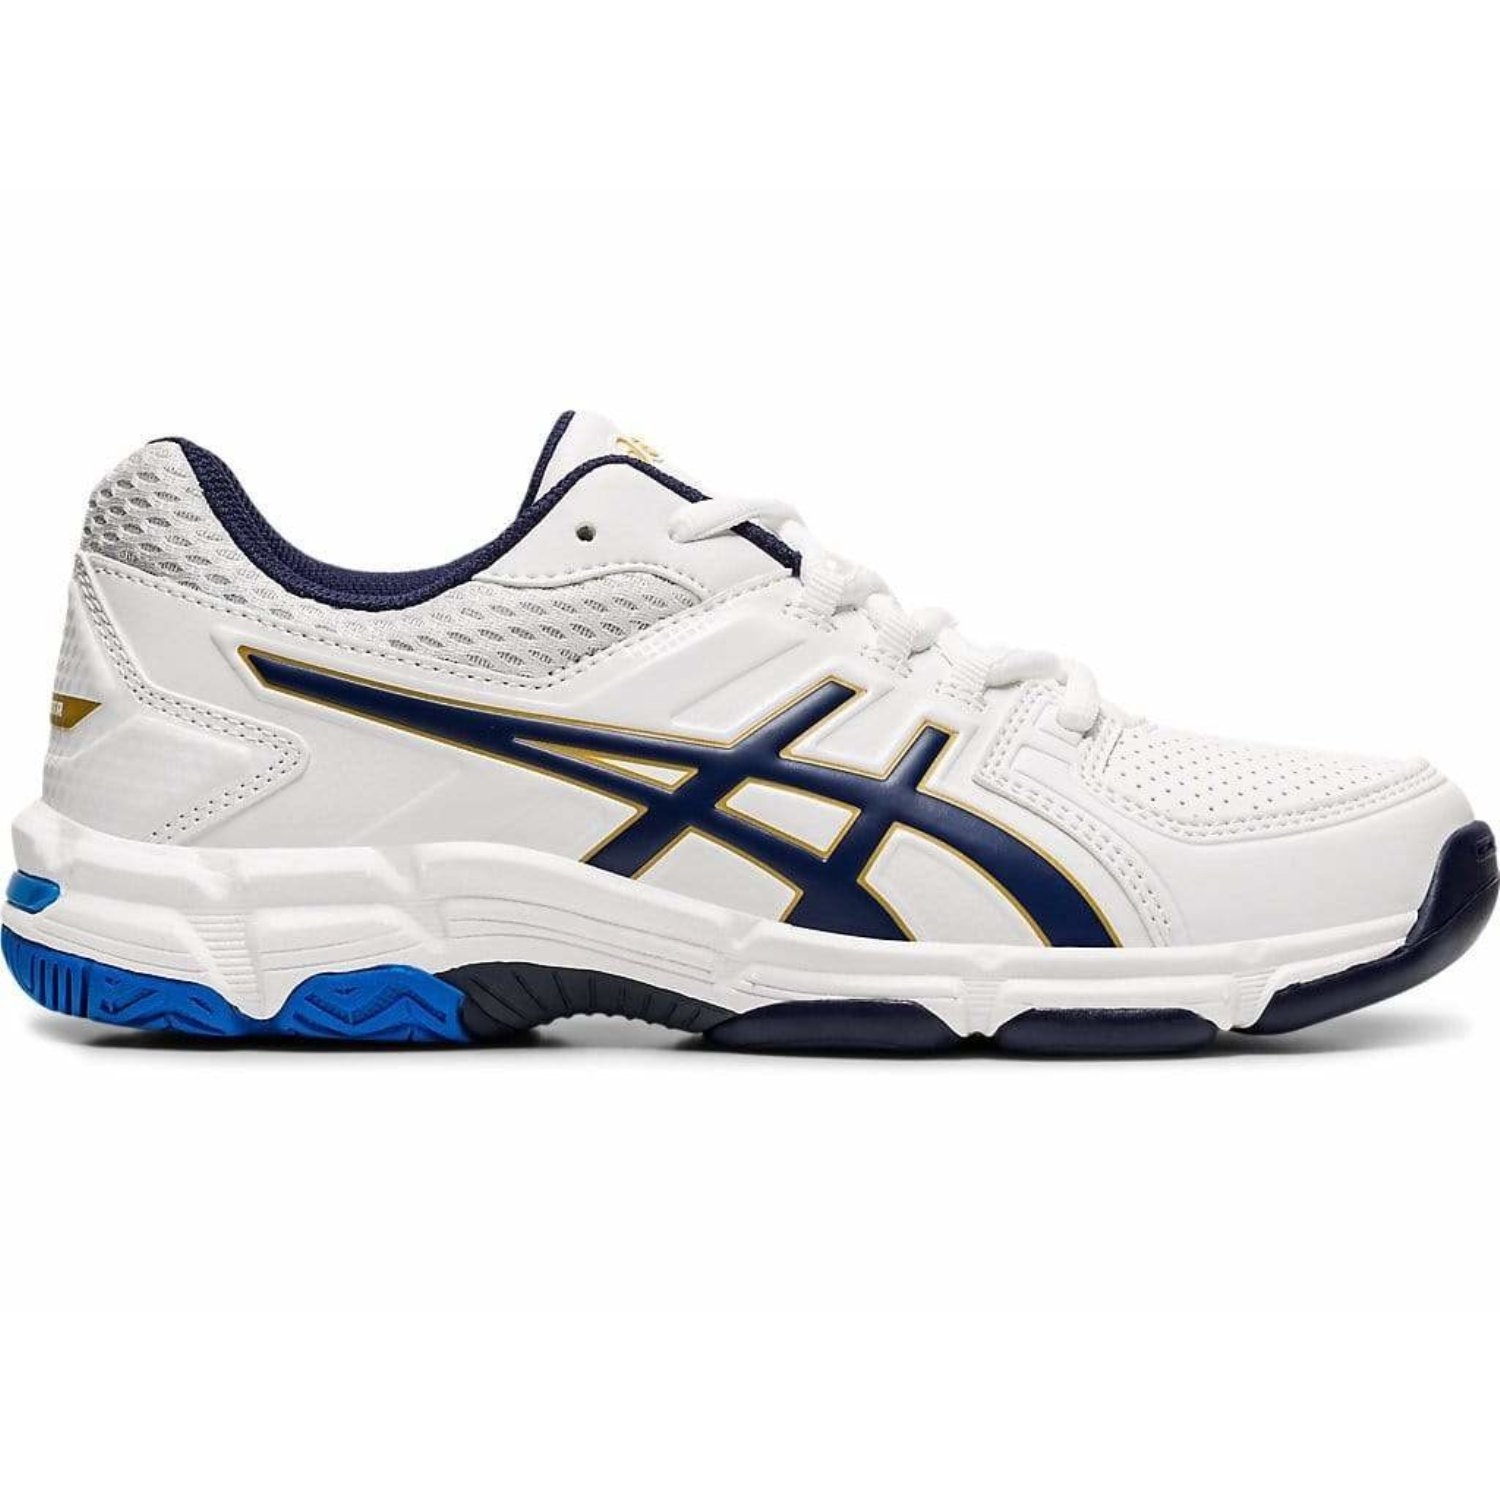 Asics Gel-540 TR Leather (2E) Wide Mens Cross Training Shoes: White ...